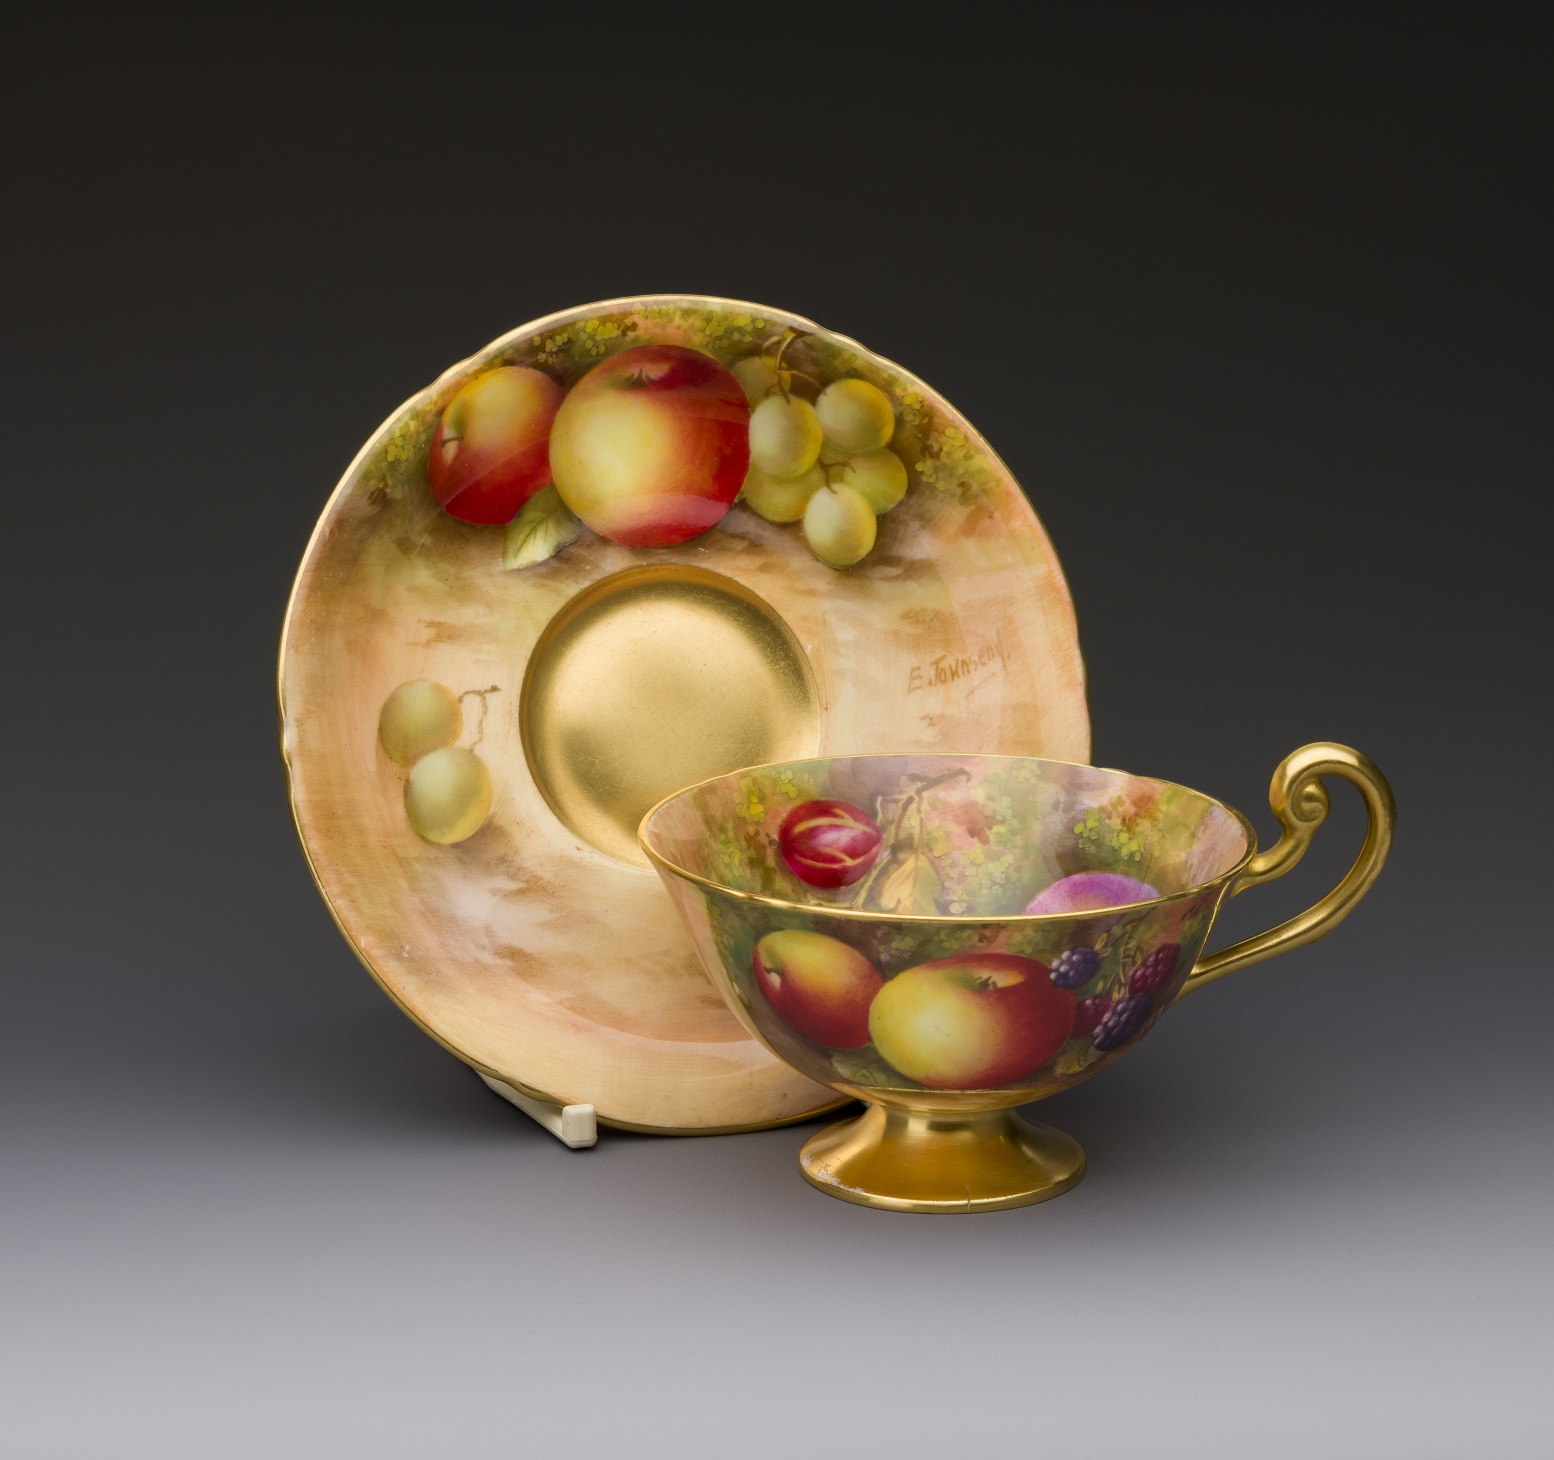 Edward Townsend tea cup and saucer